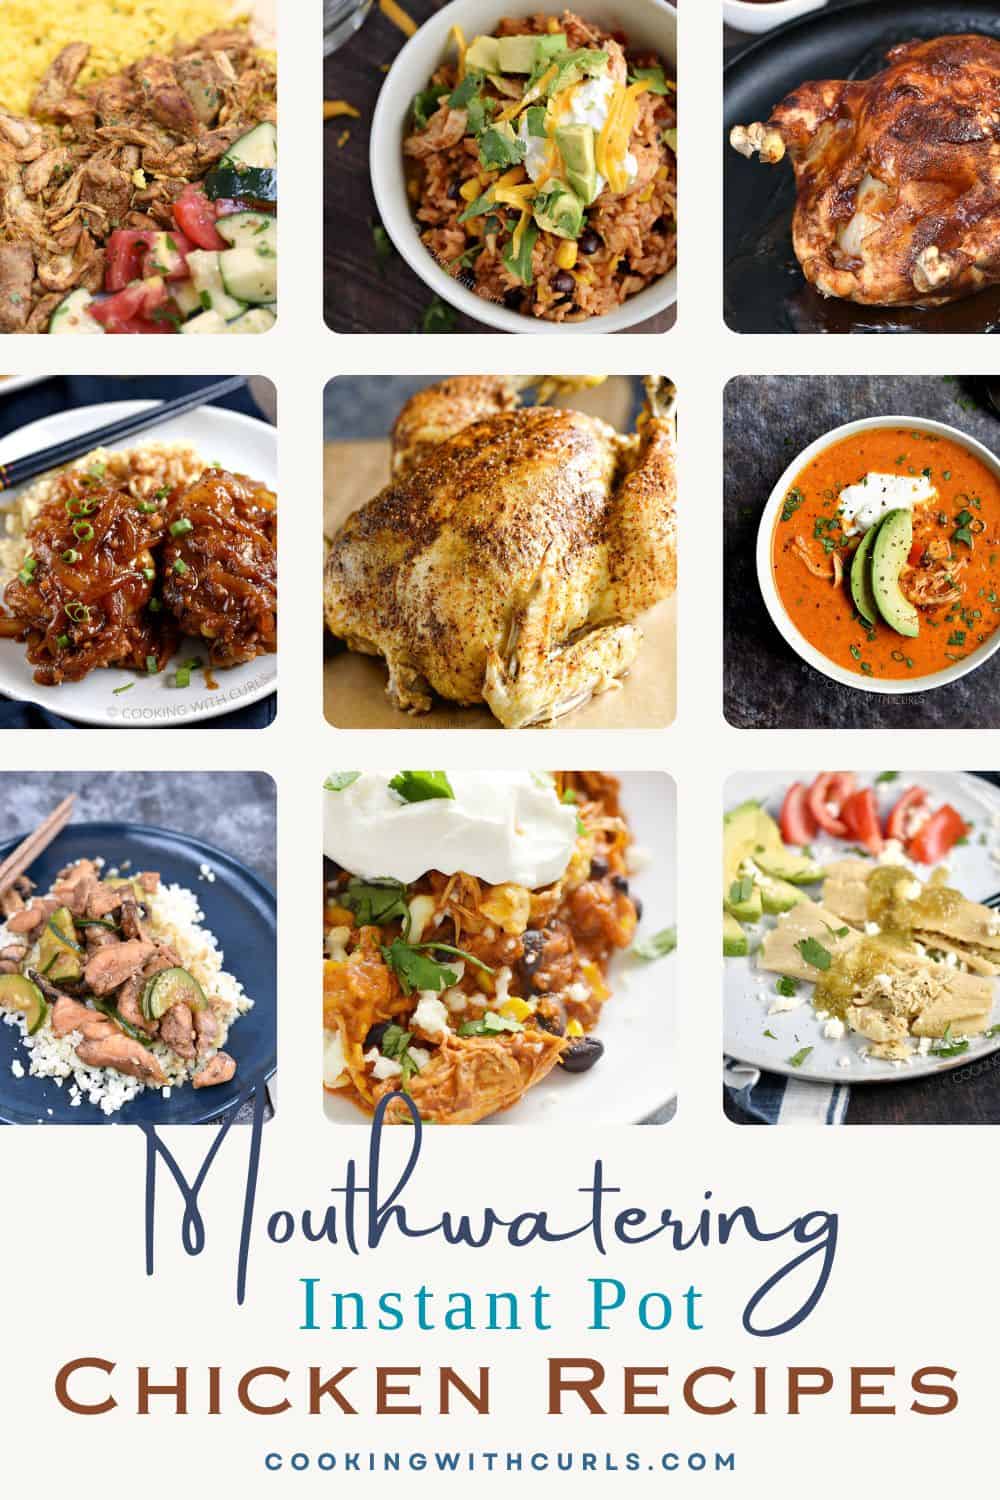 Mouthwatering Instant Pot Chicken Recipes collage with nine images and title graphic across the bottom.